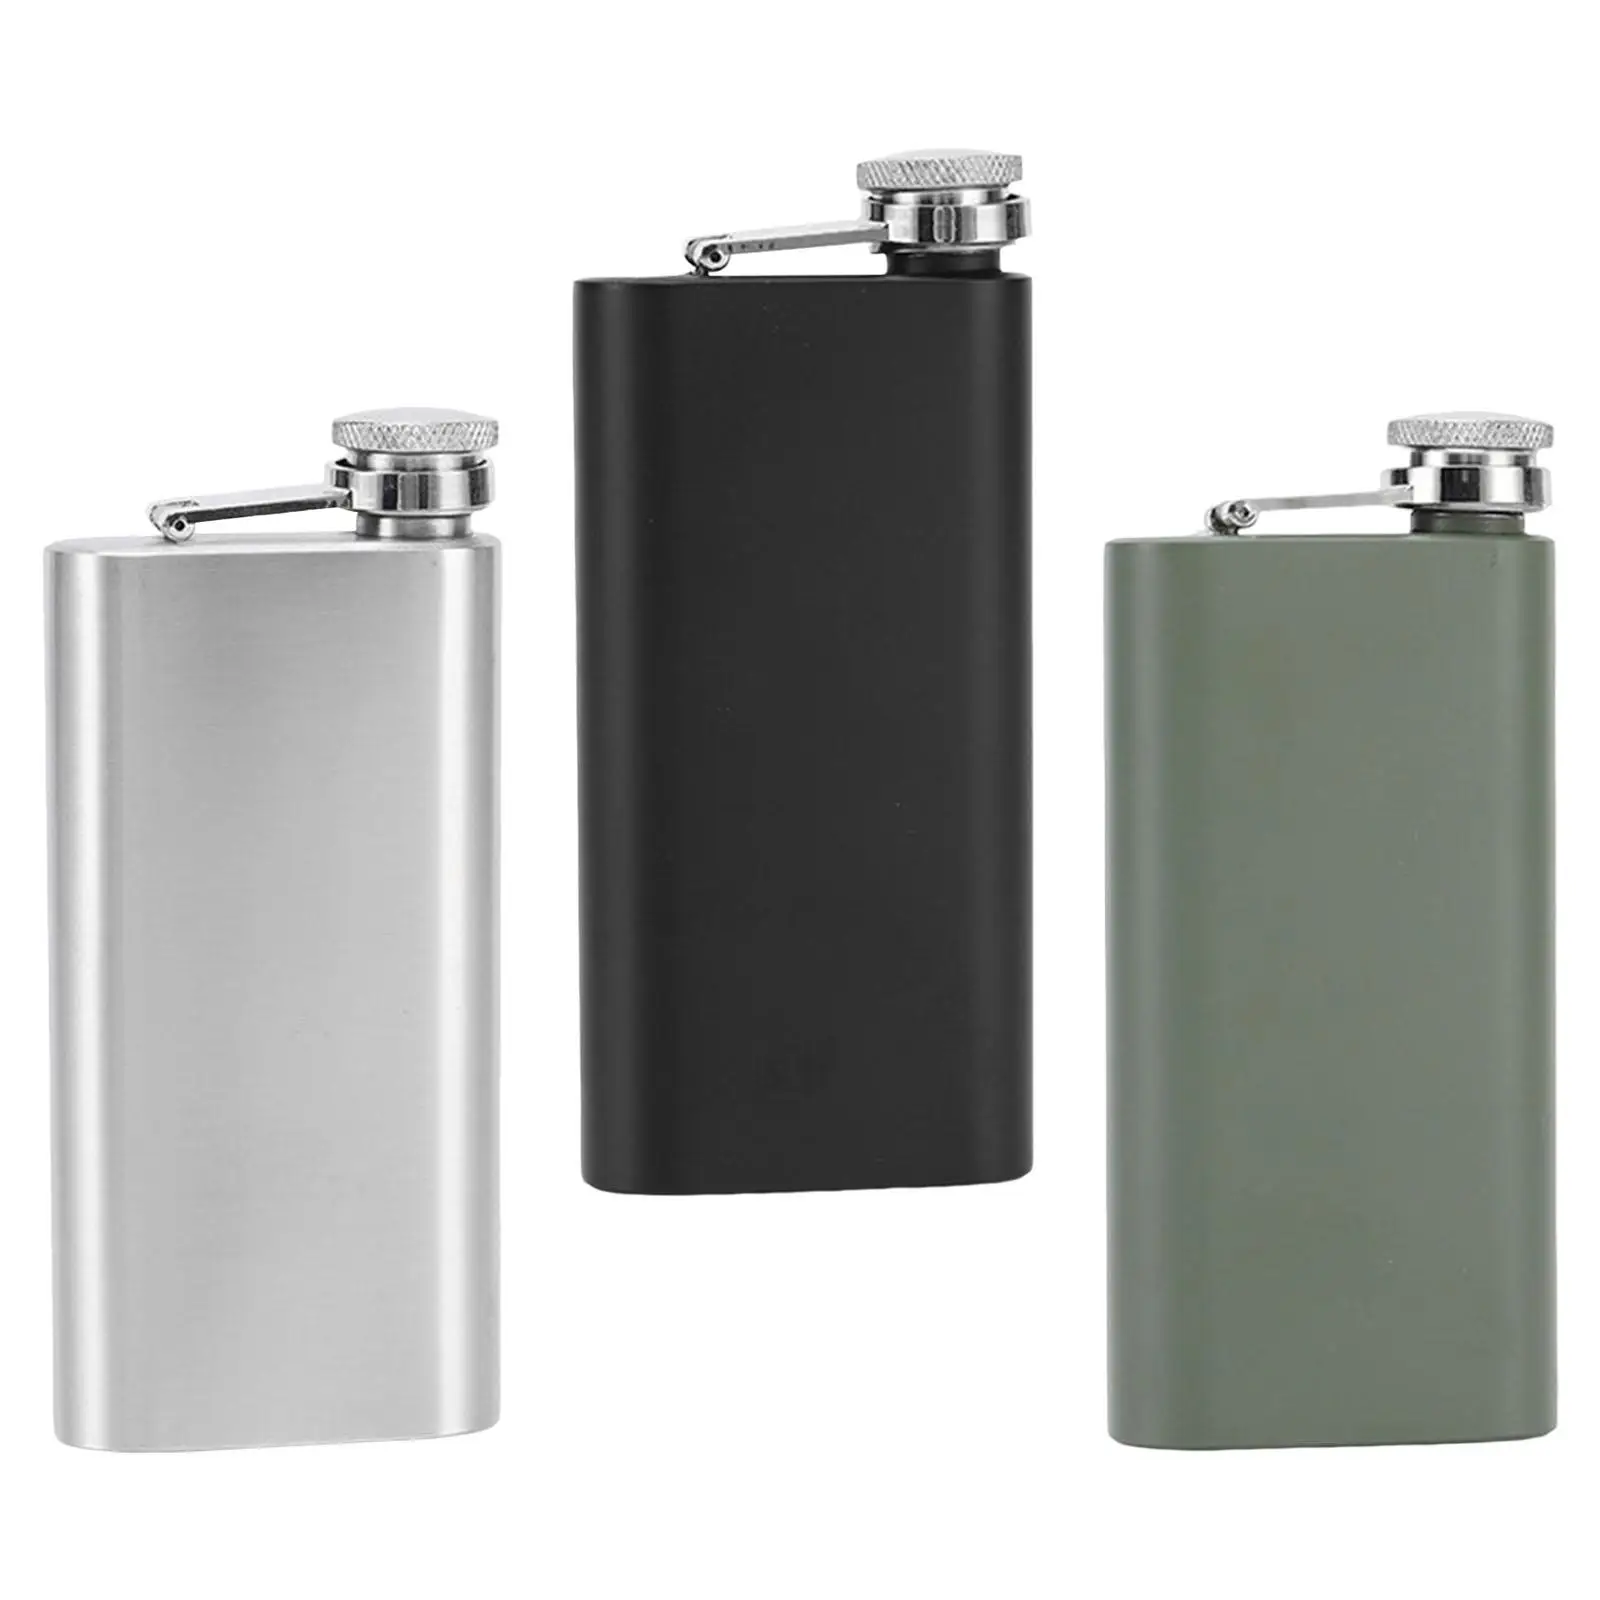 140ml Drinking Bottle Leakproof Stainless Steel liquid Flagon Portable Drink Pocket for Outgoing Hiking Wedding Hunting